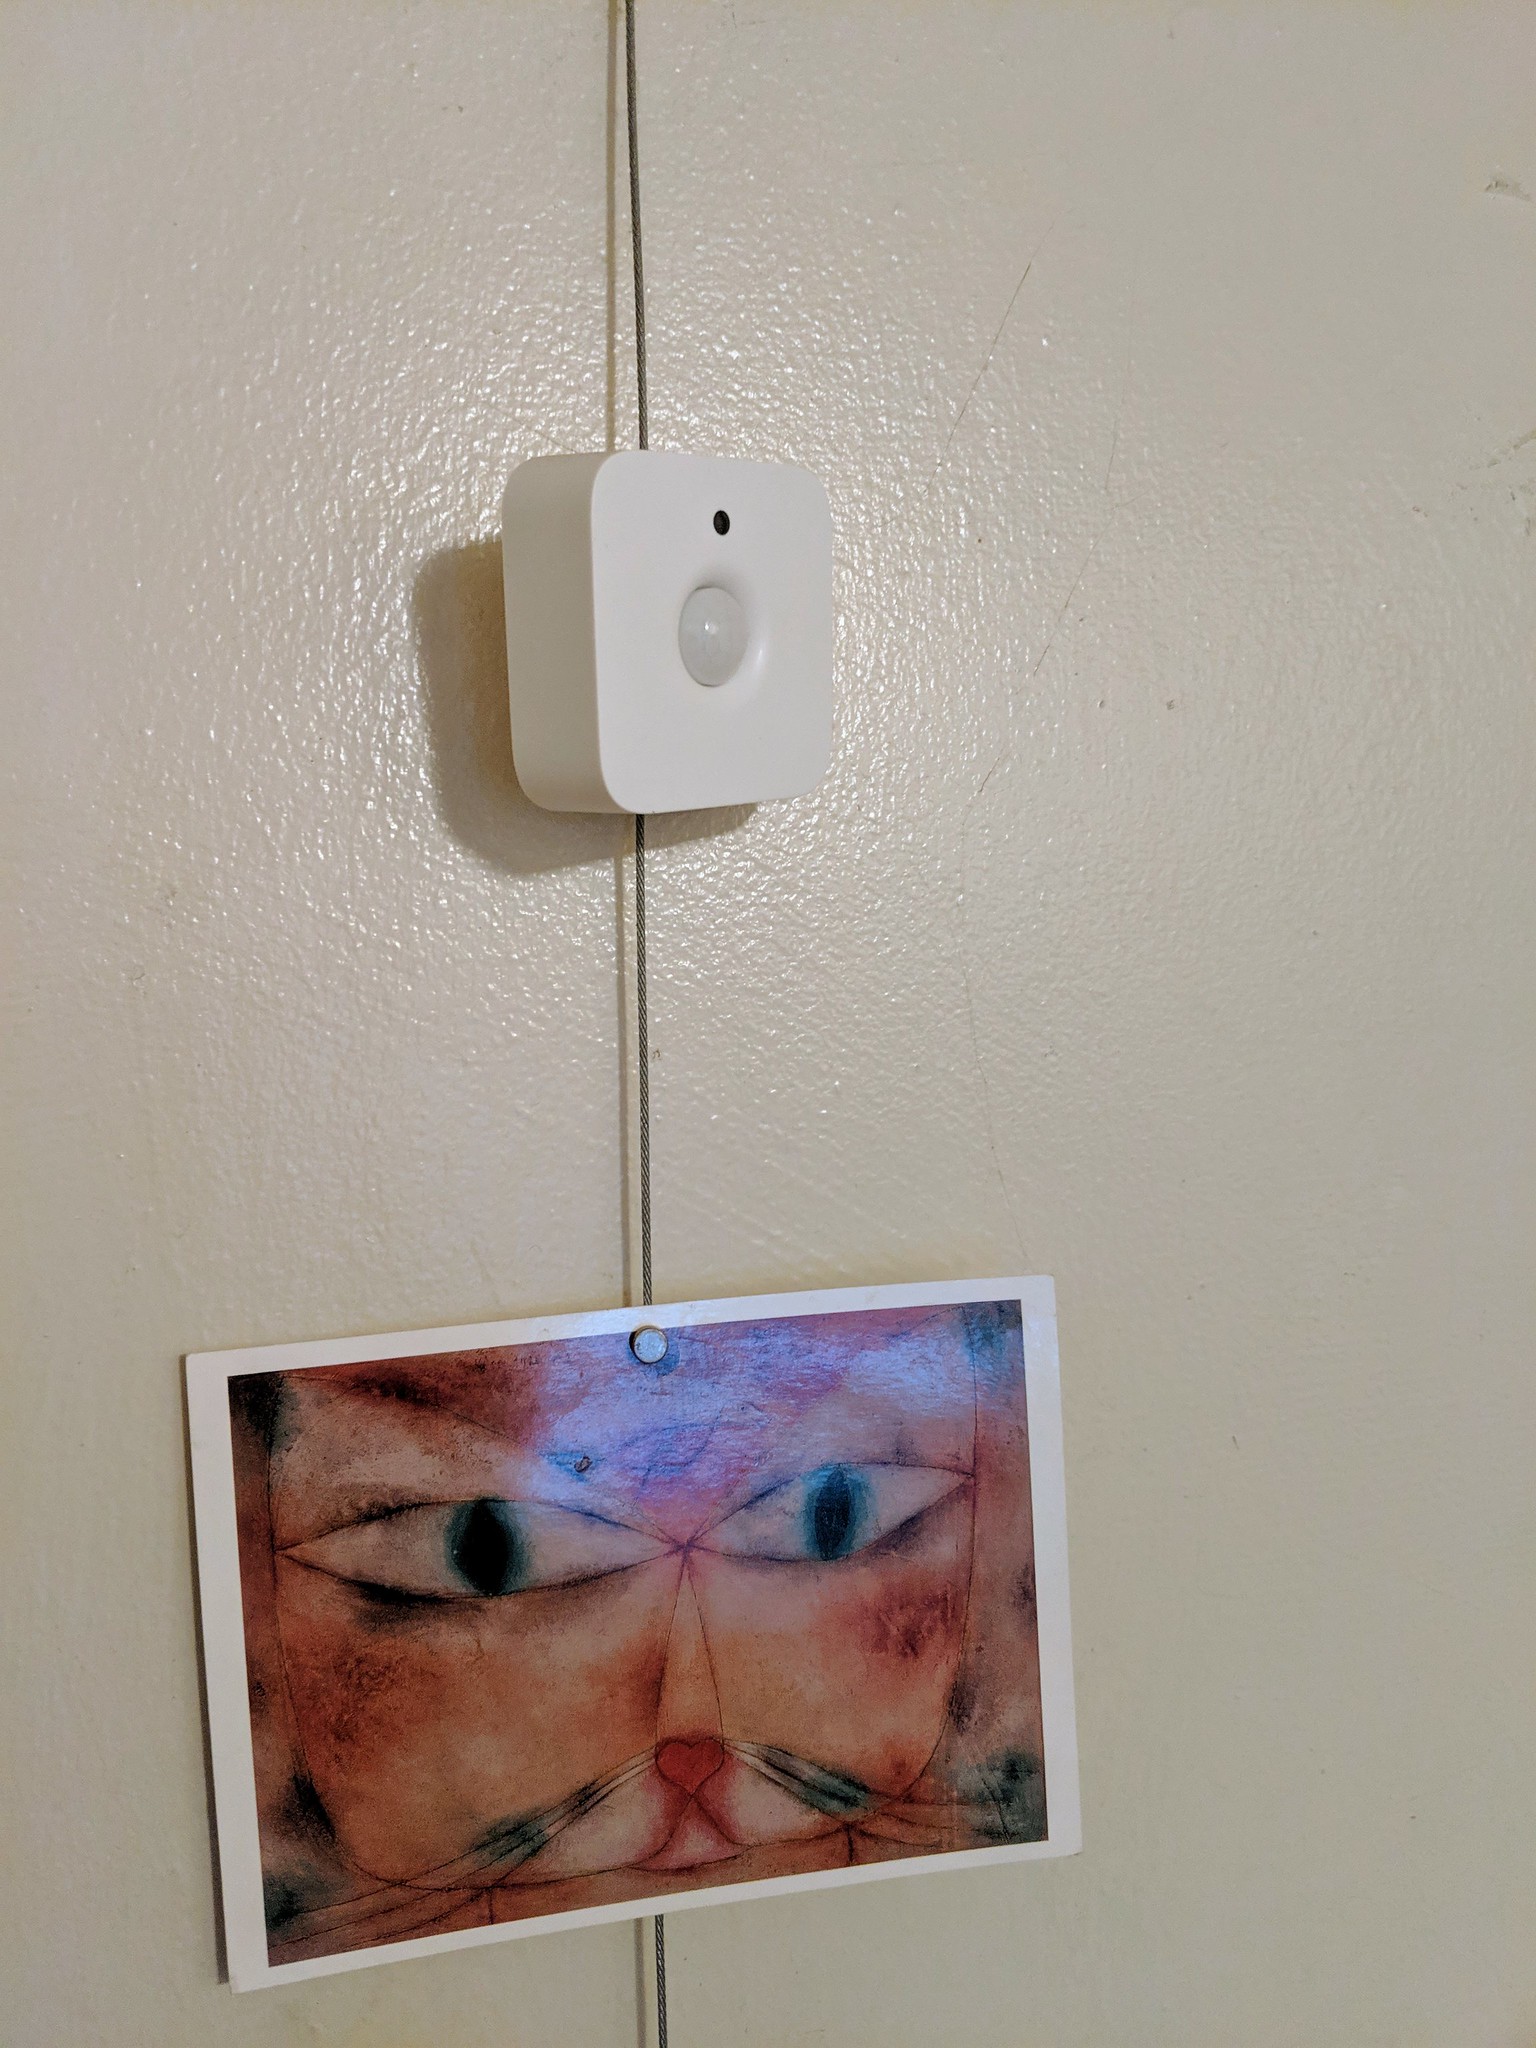 Philips Hue motion sensors include a magnet